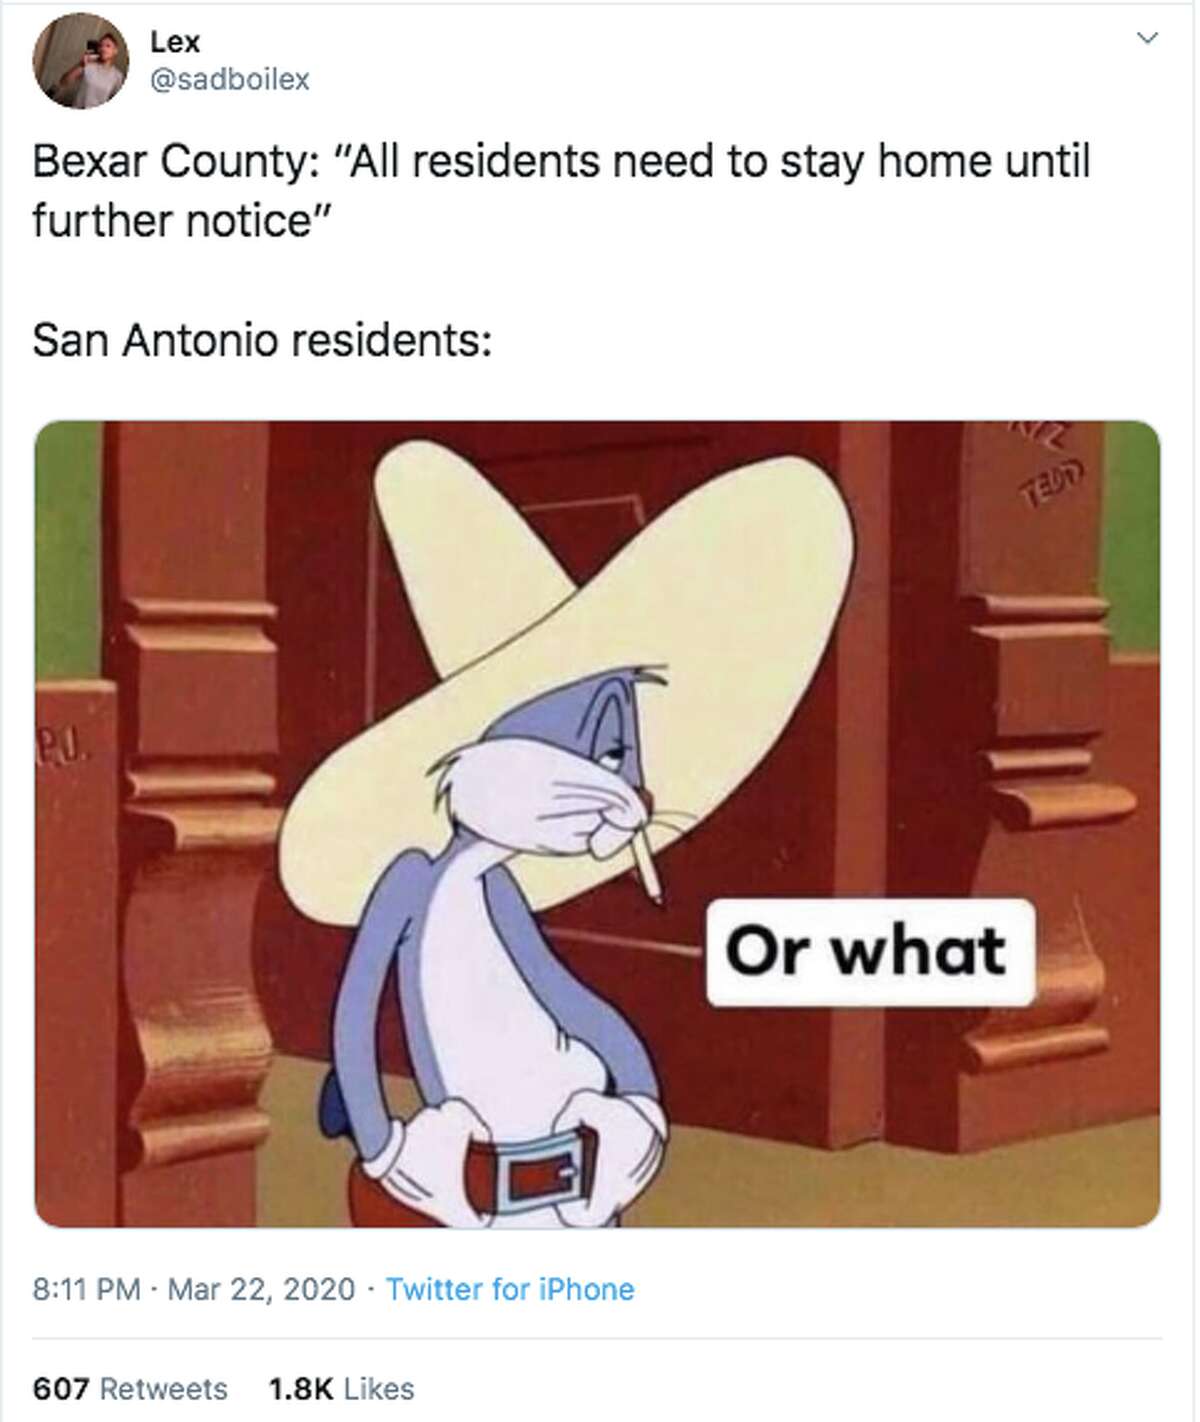 @sadboilex creates a meme to joke about how some San Antonians are reacting to staying at home during the coronavirus pandemic.